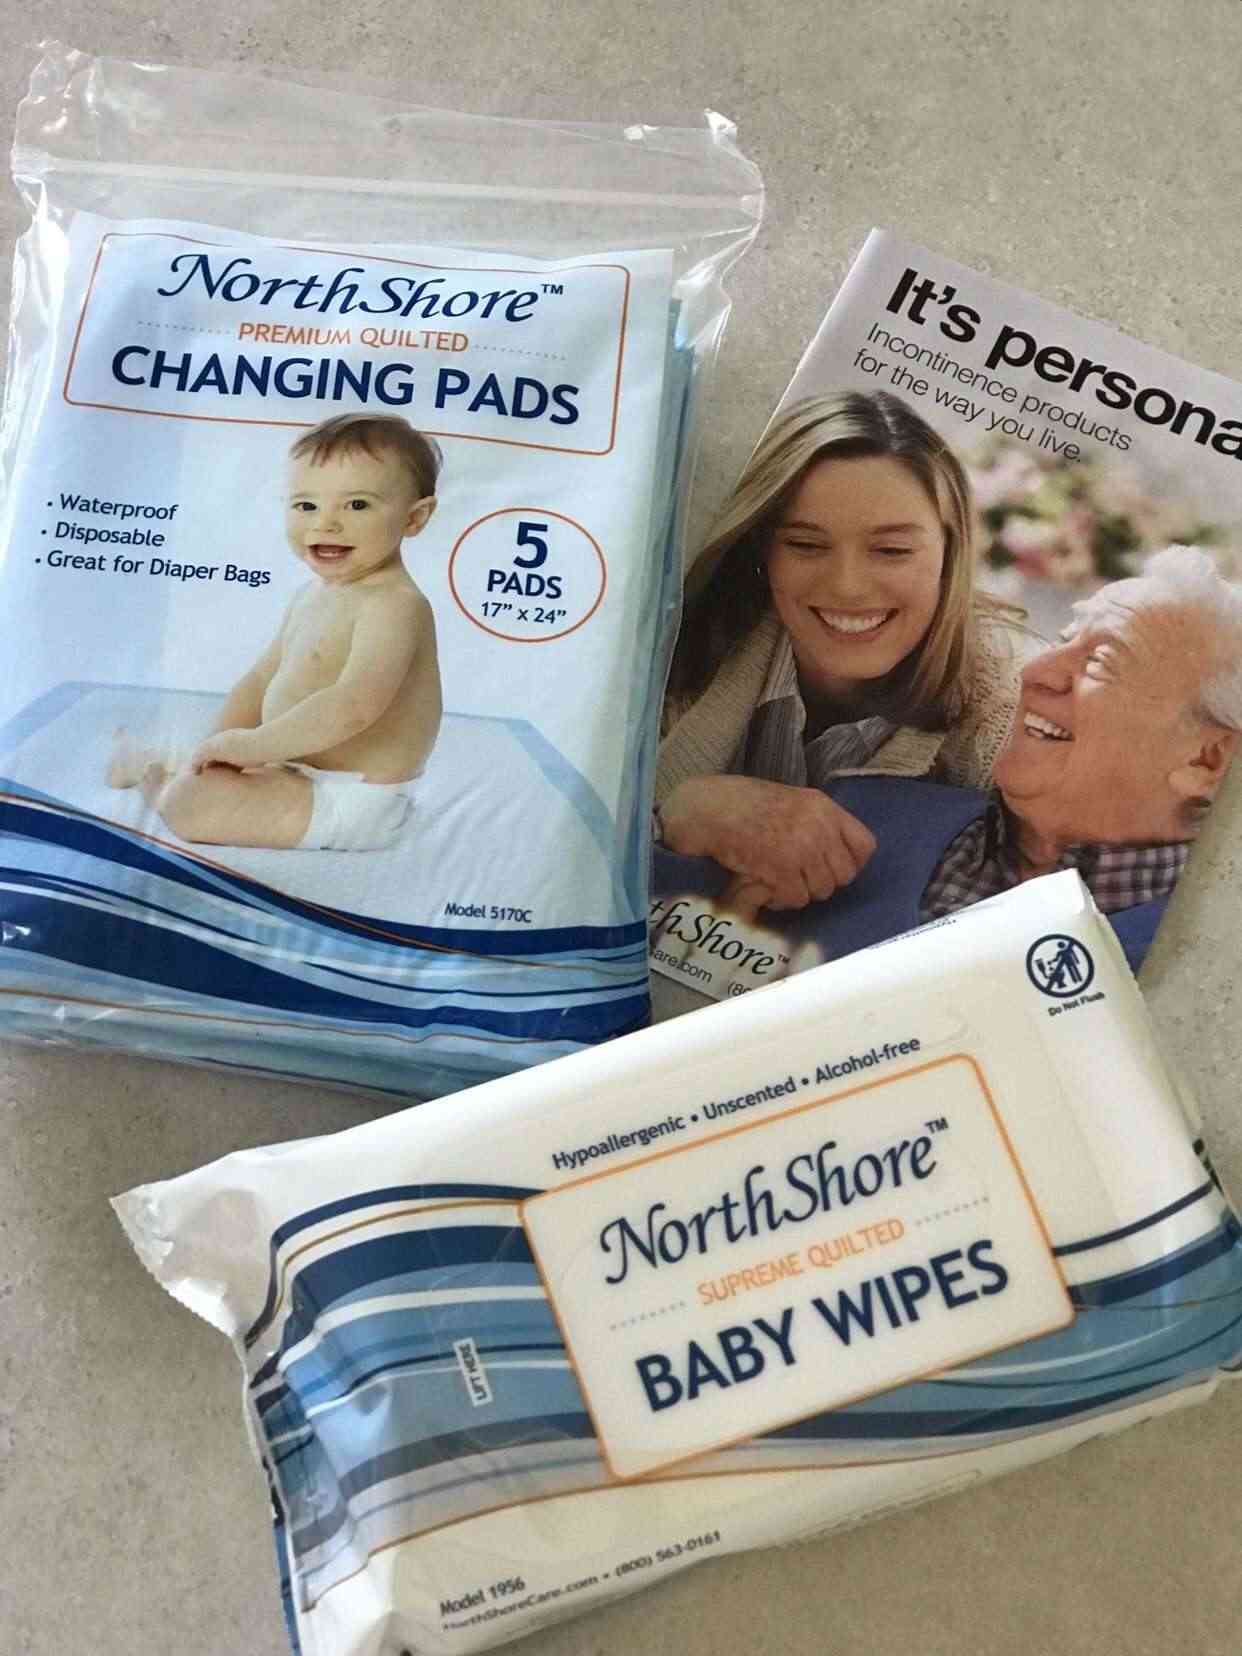 north-shore-changing-pads-and-baby-wipes-moms-on-the-go-teachworkoutlove.com